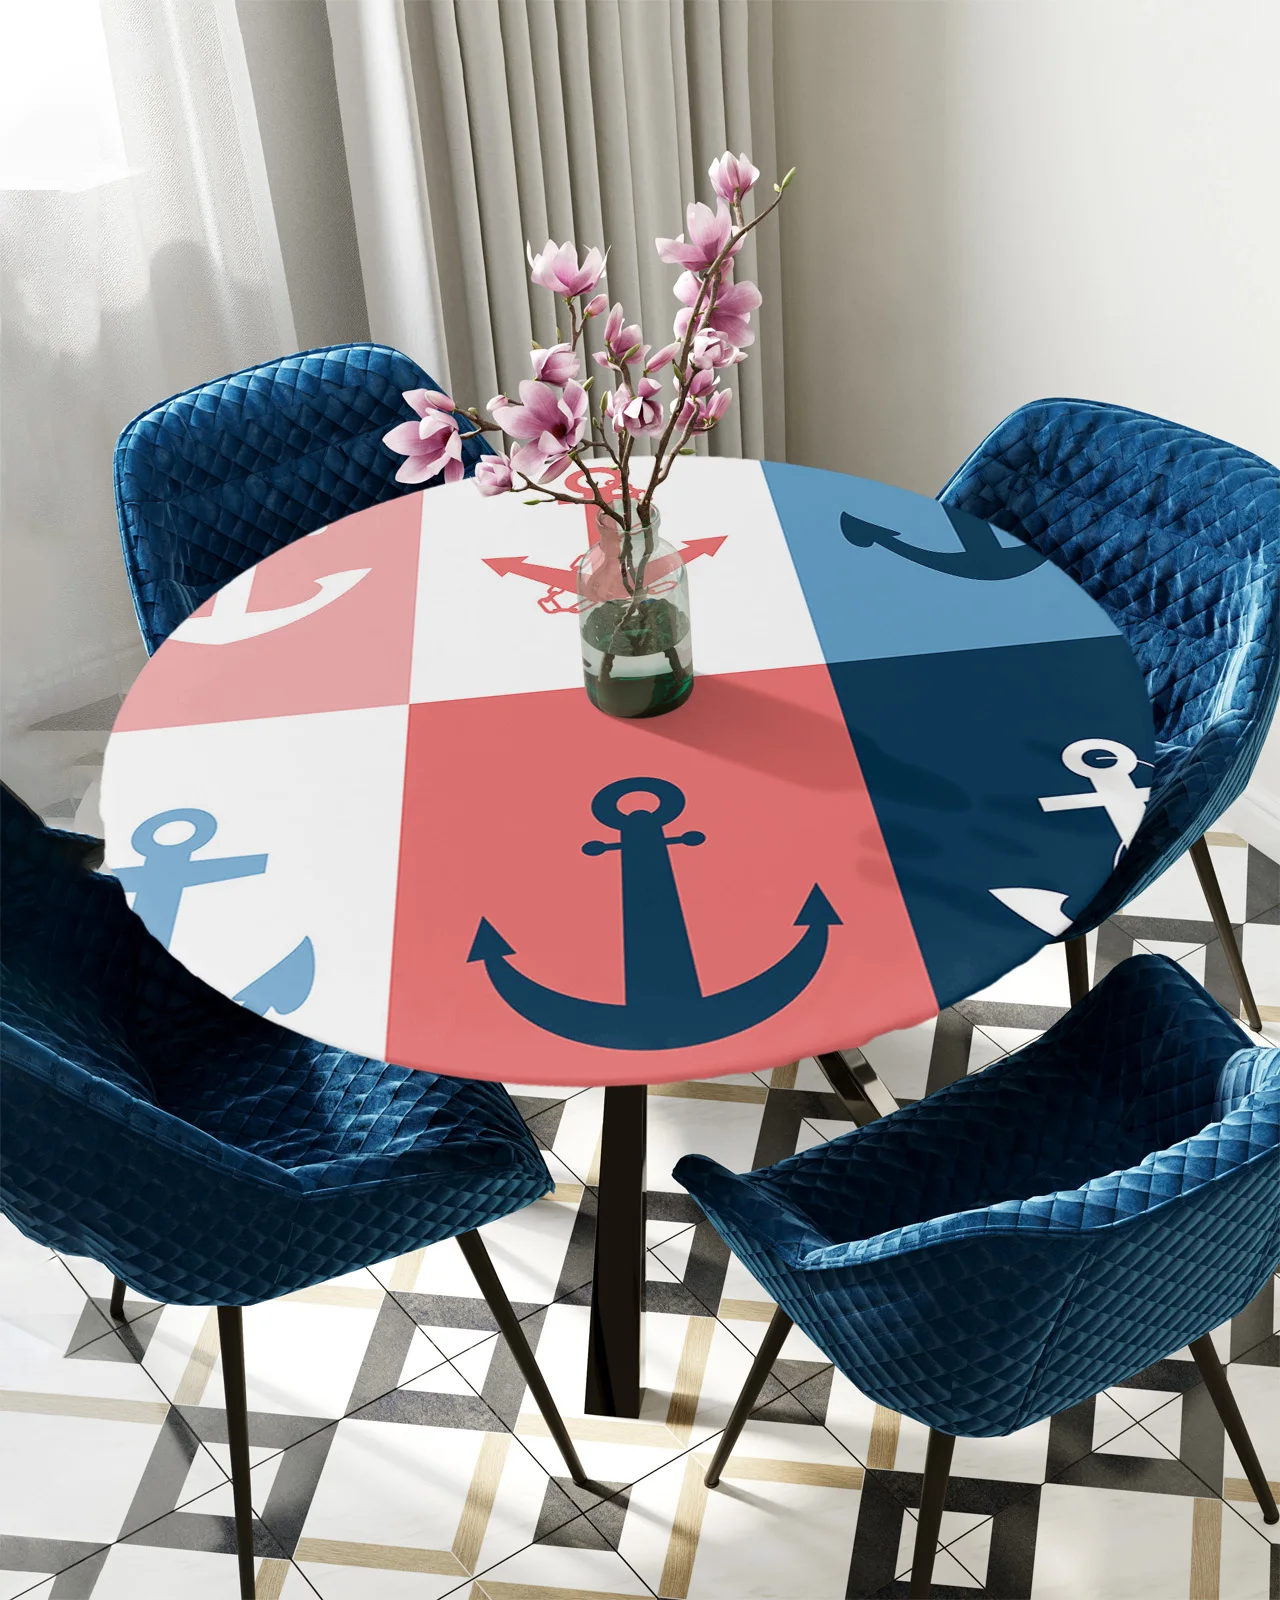 

Splice Sea Anchor Round Rectangular Table Cover Waterproof Elastic Tablecloth For Kitchen Table Cloth Home Decoration